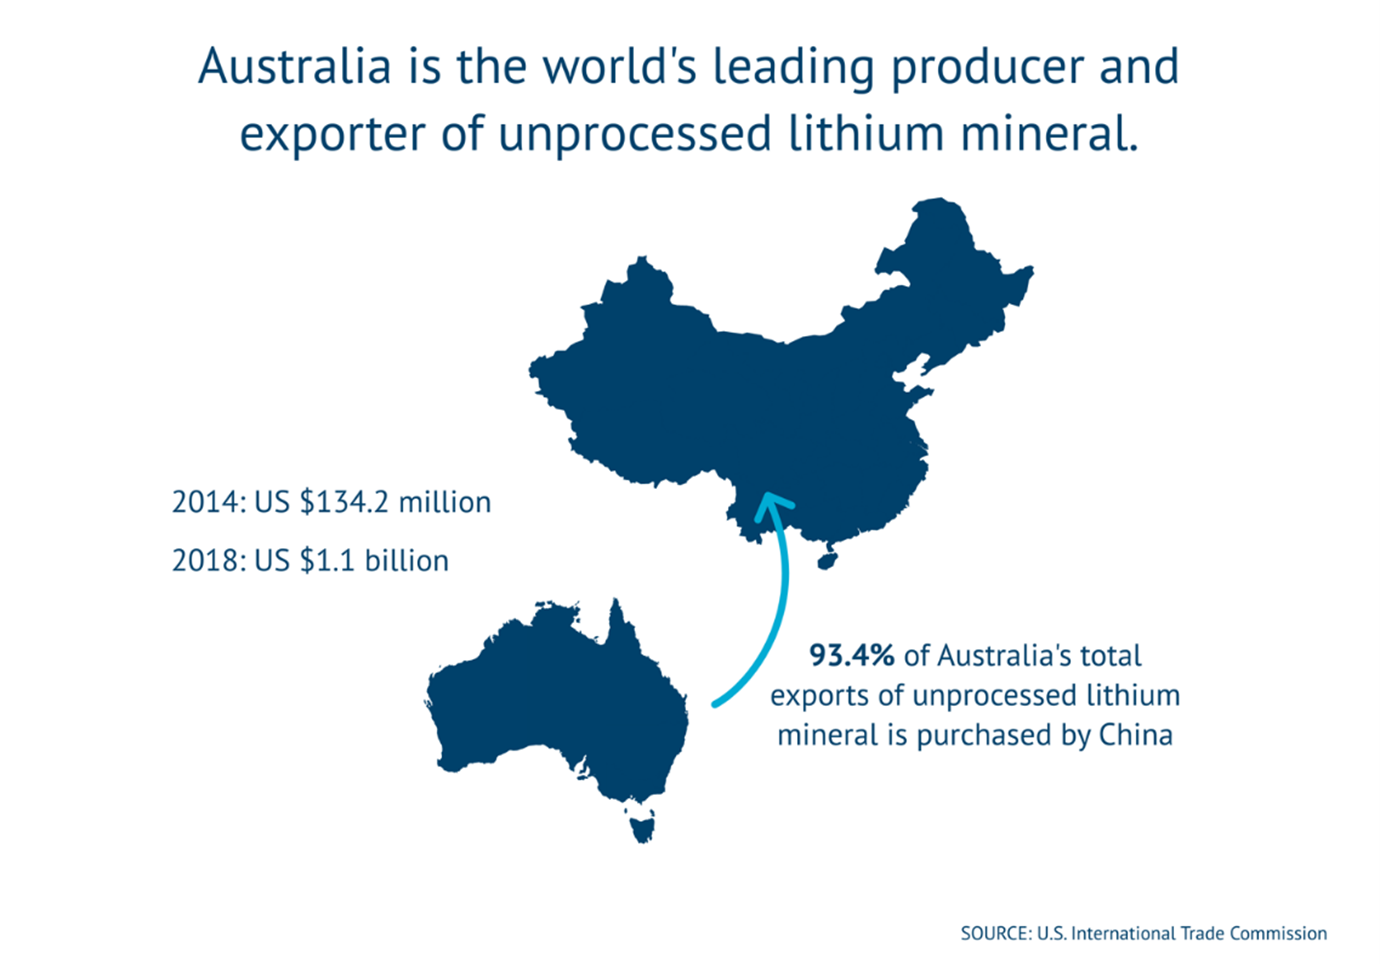 Australia producer and exporter of unprocessed lithium mineral